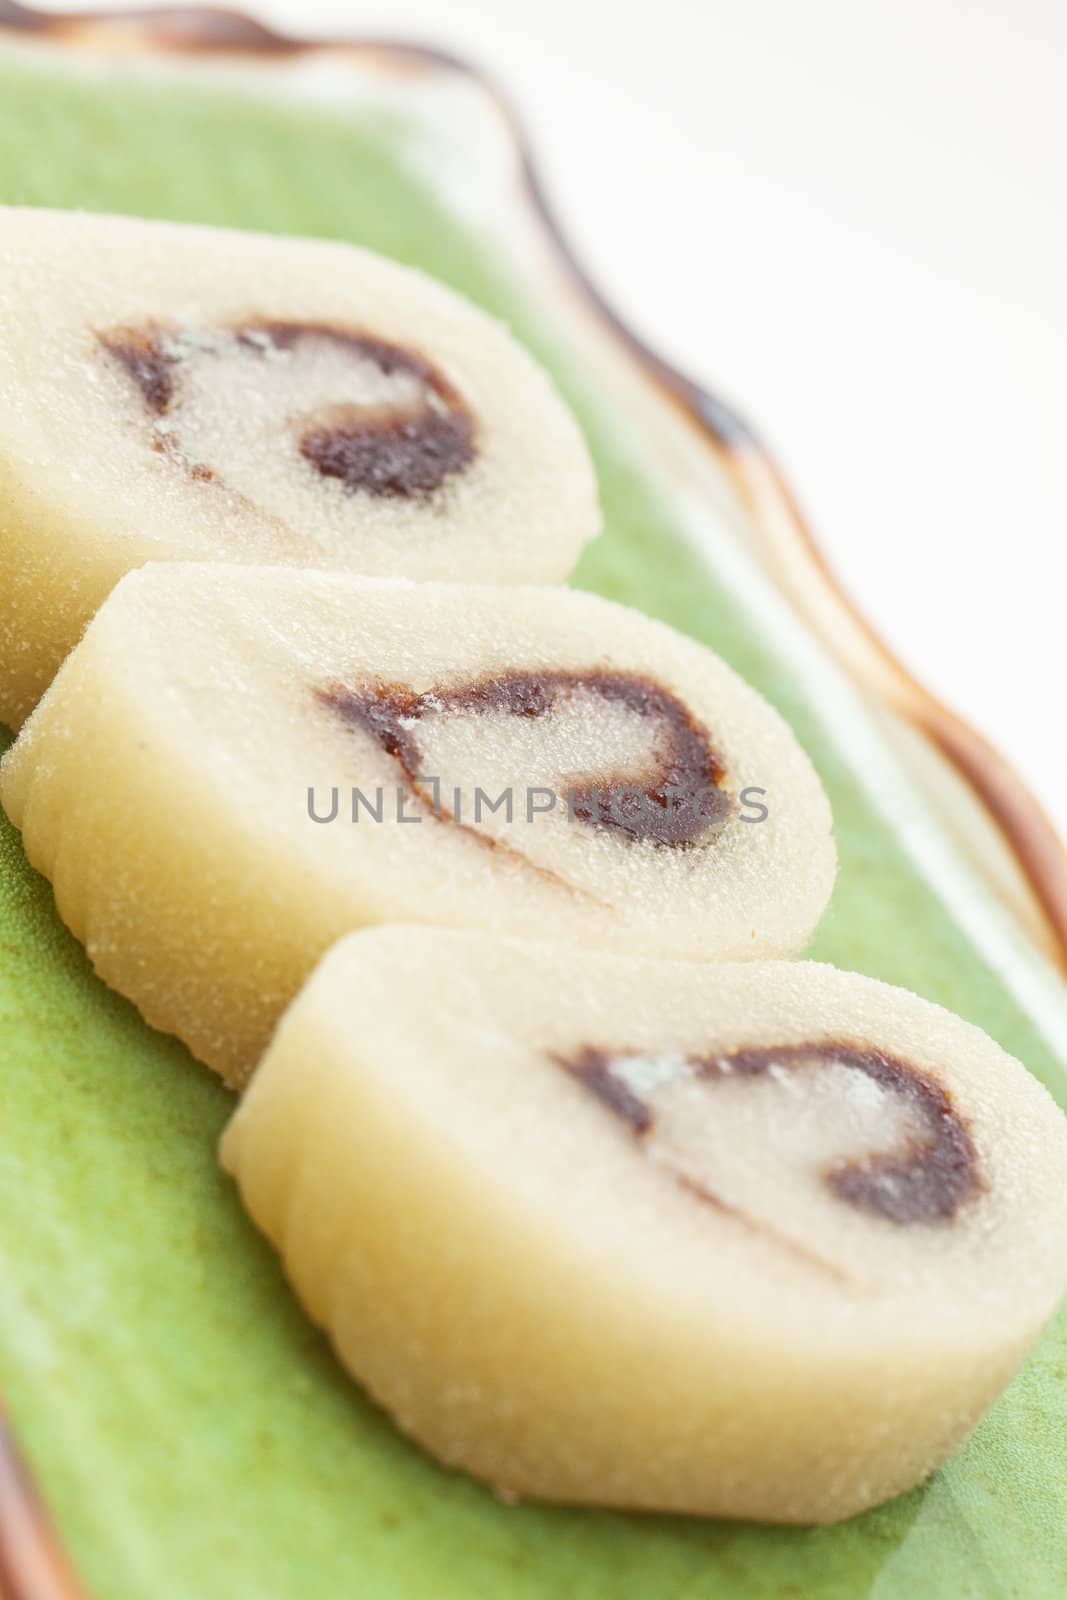 Banana roll on dishes by kawing921